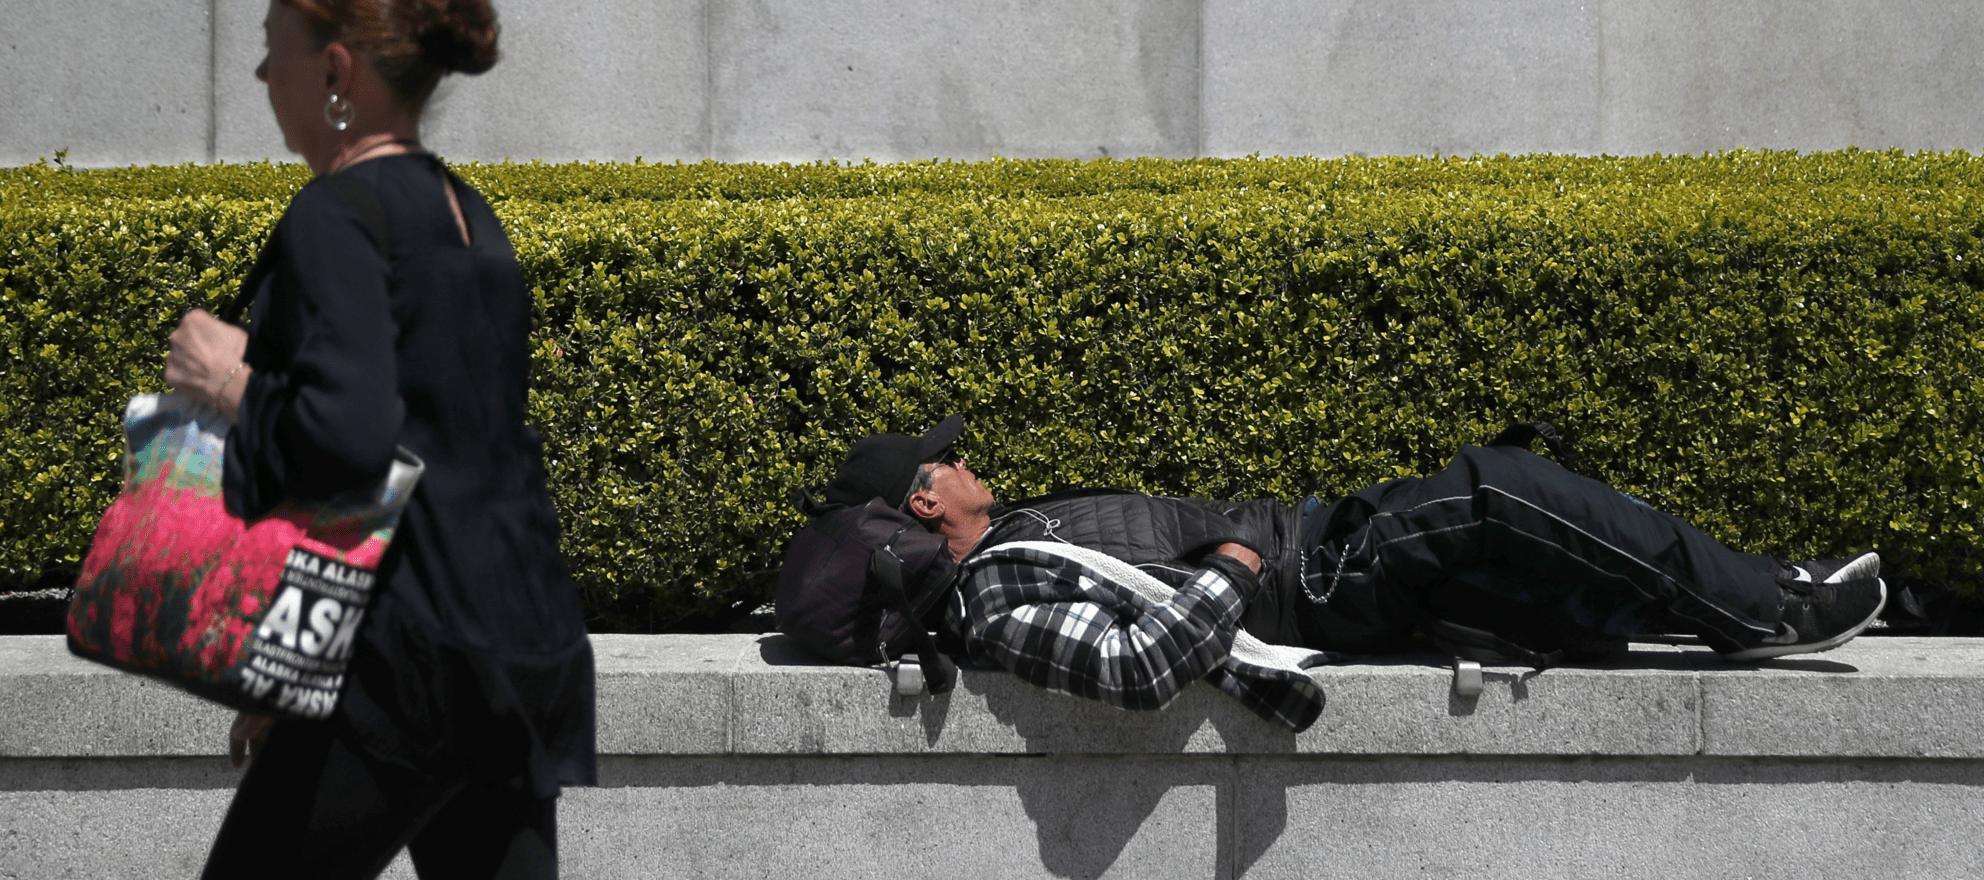 San Francisco at center of battle over 'anti-homeless architecture'